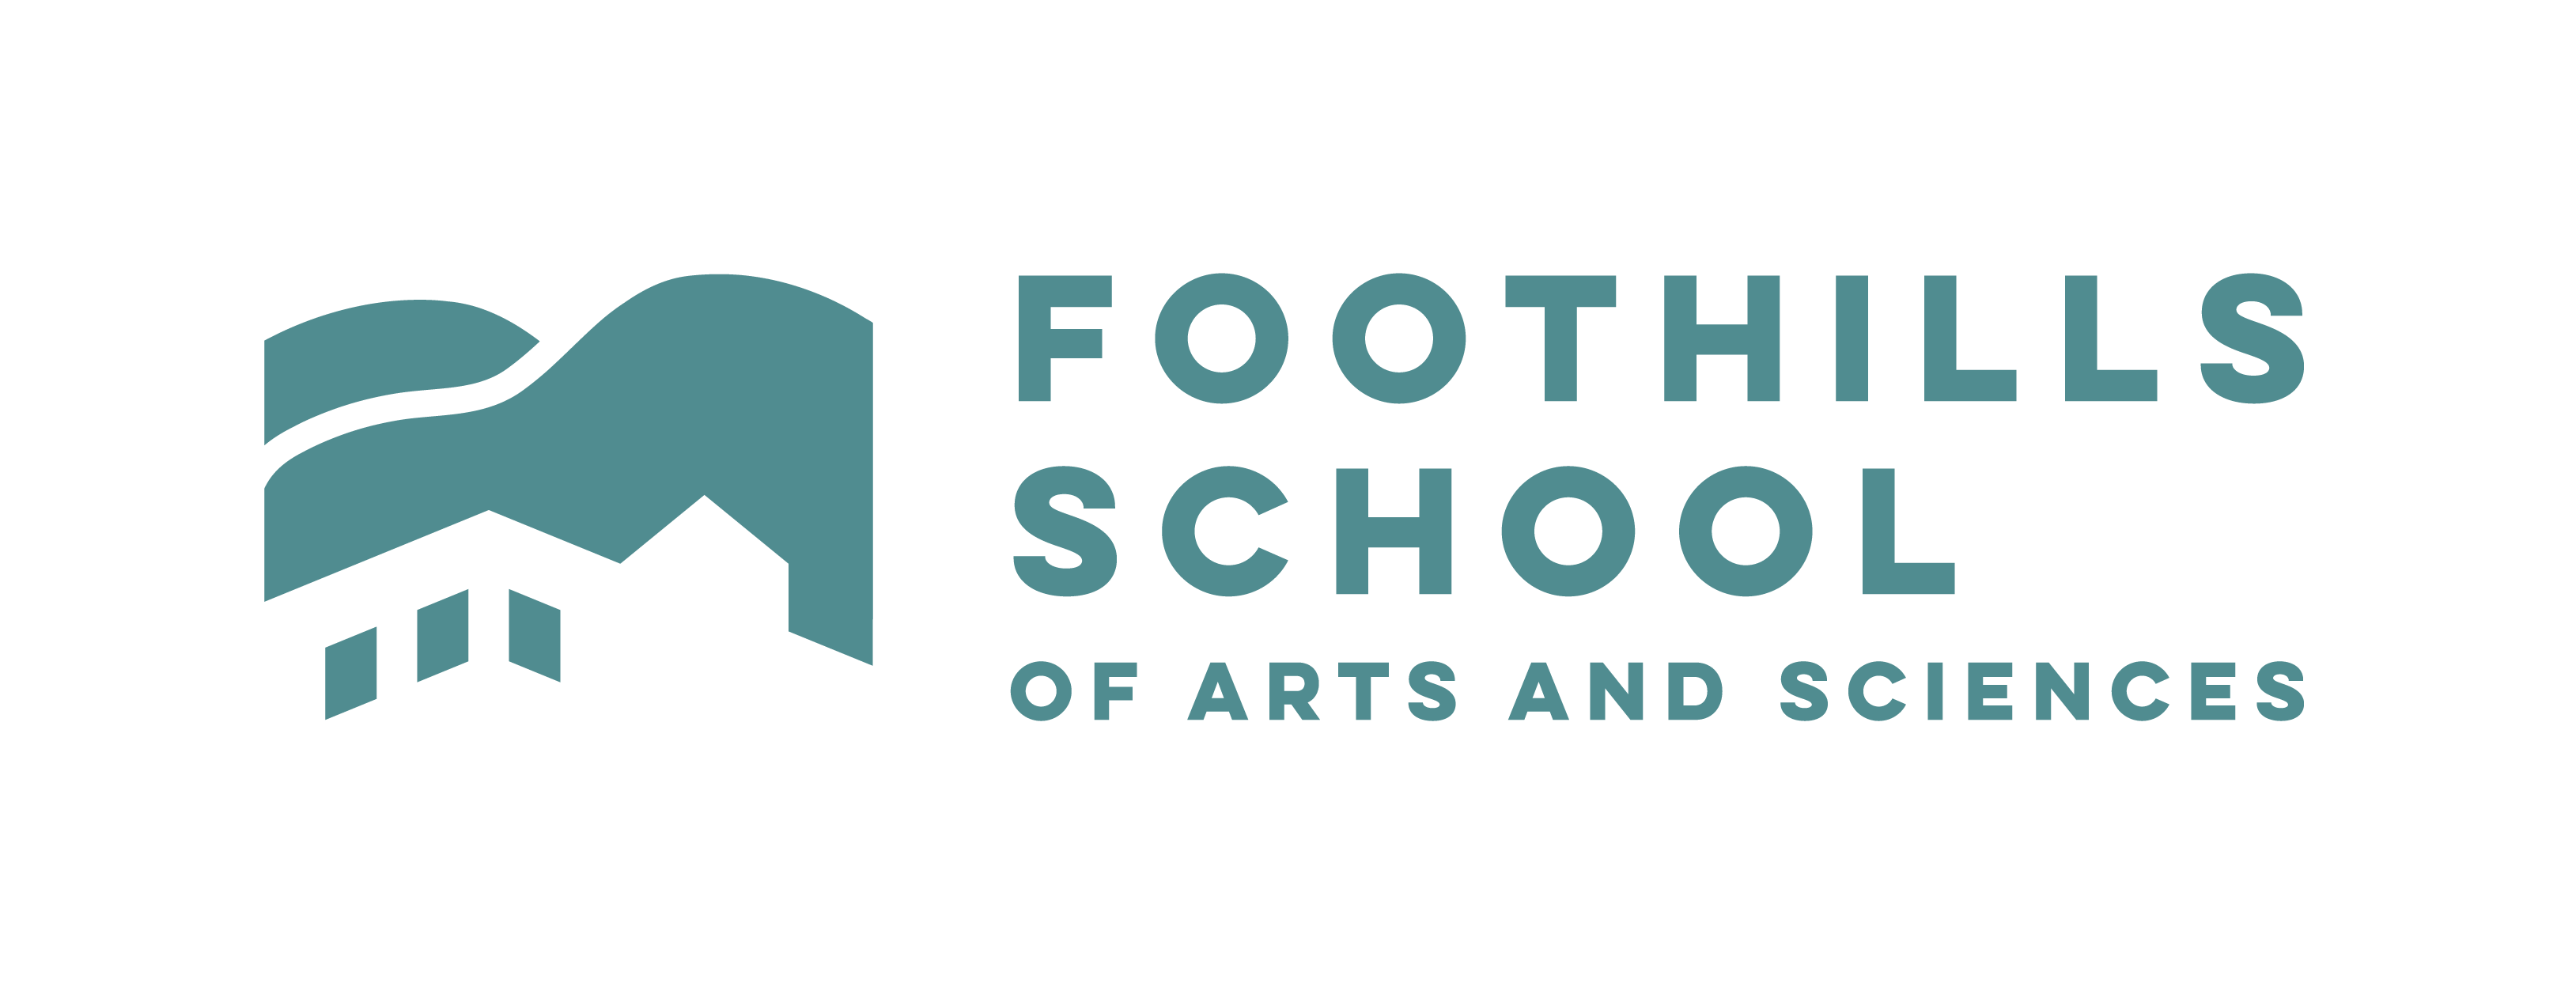 Foothills School of Arts and Sciences